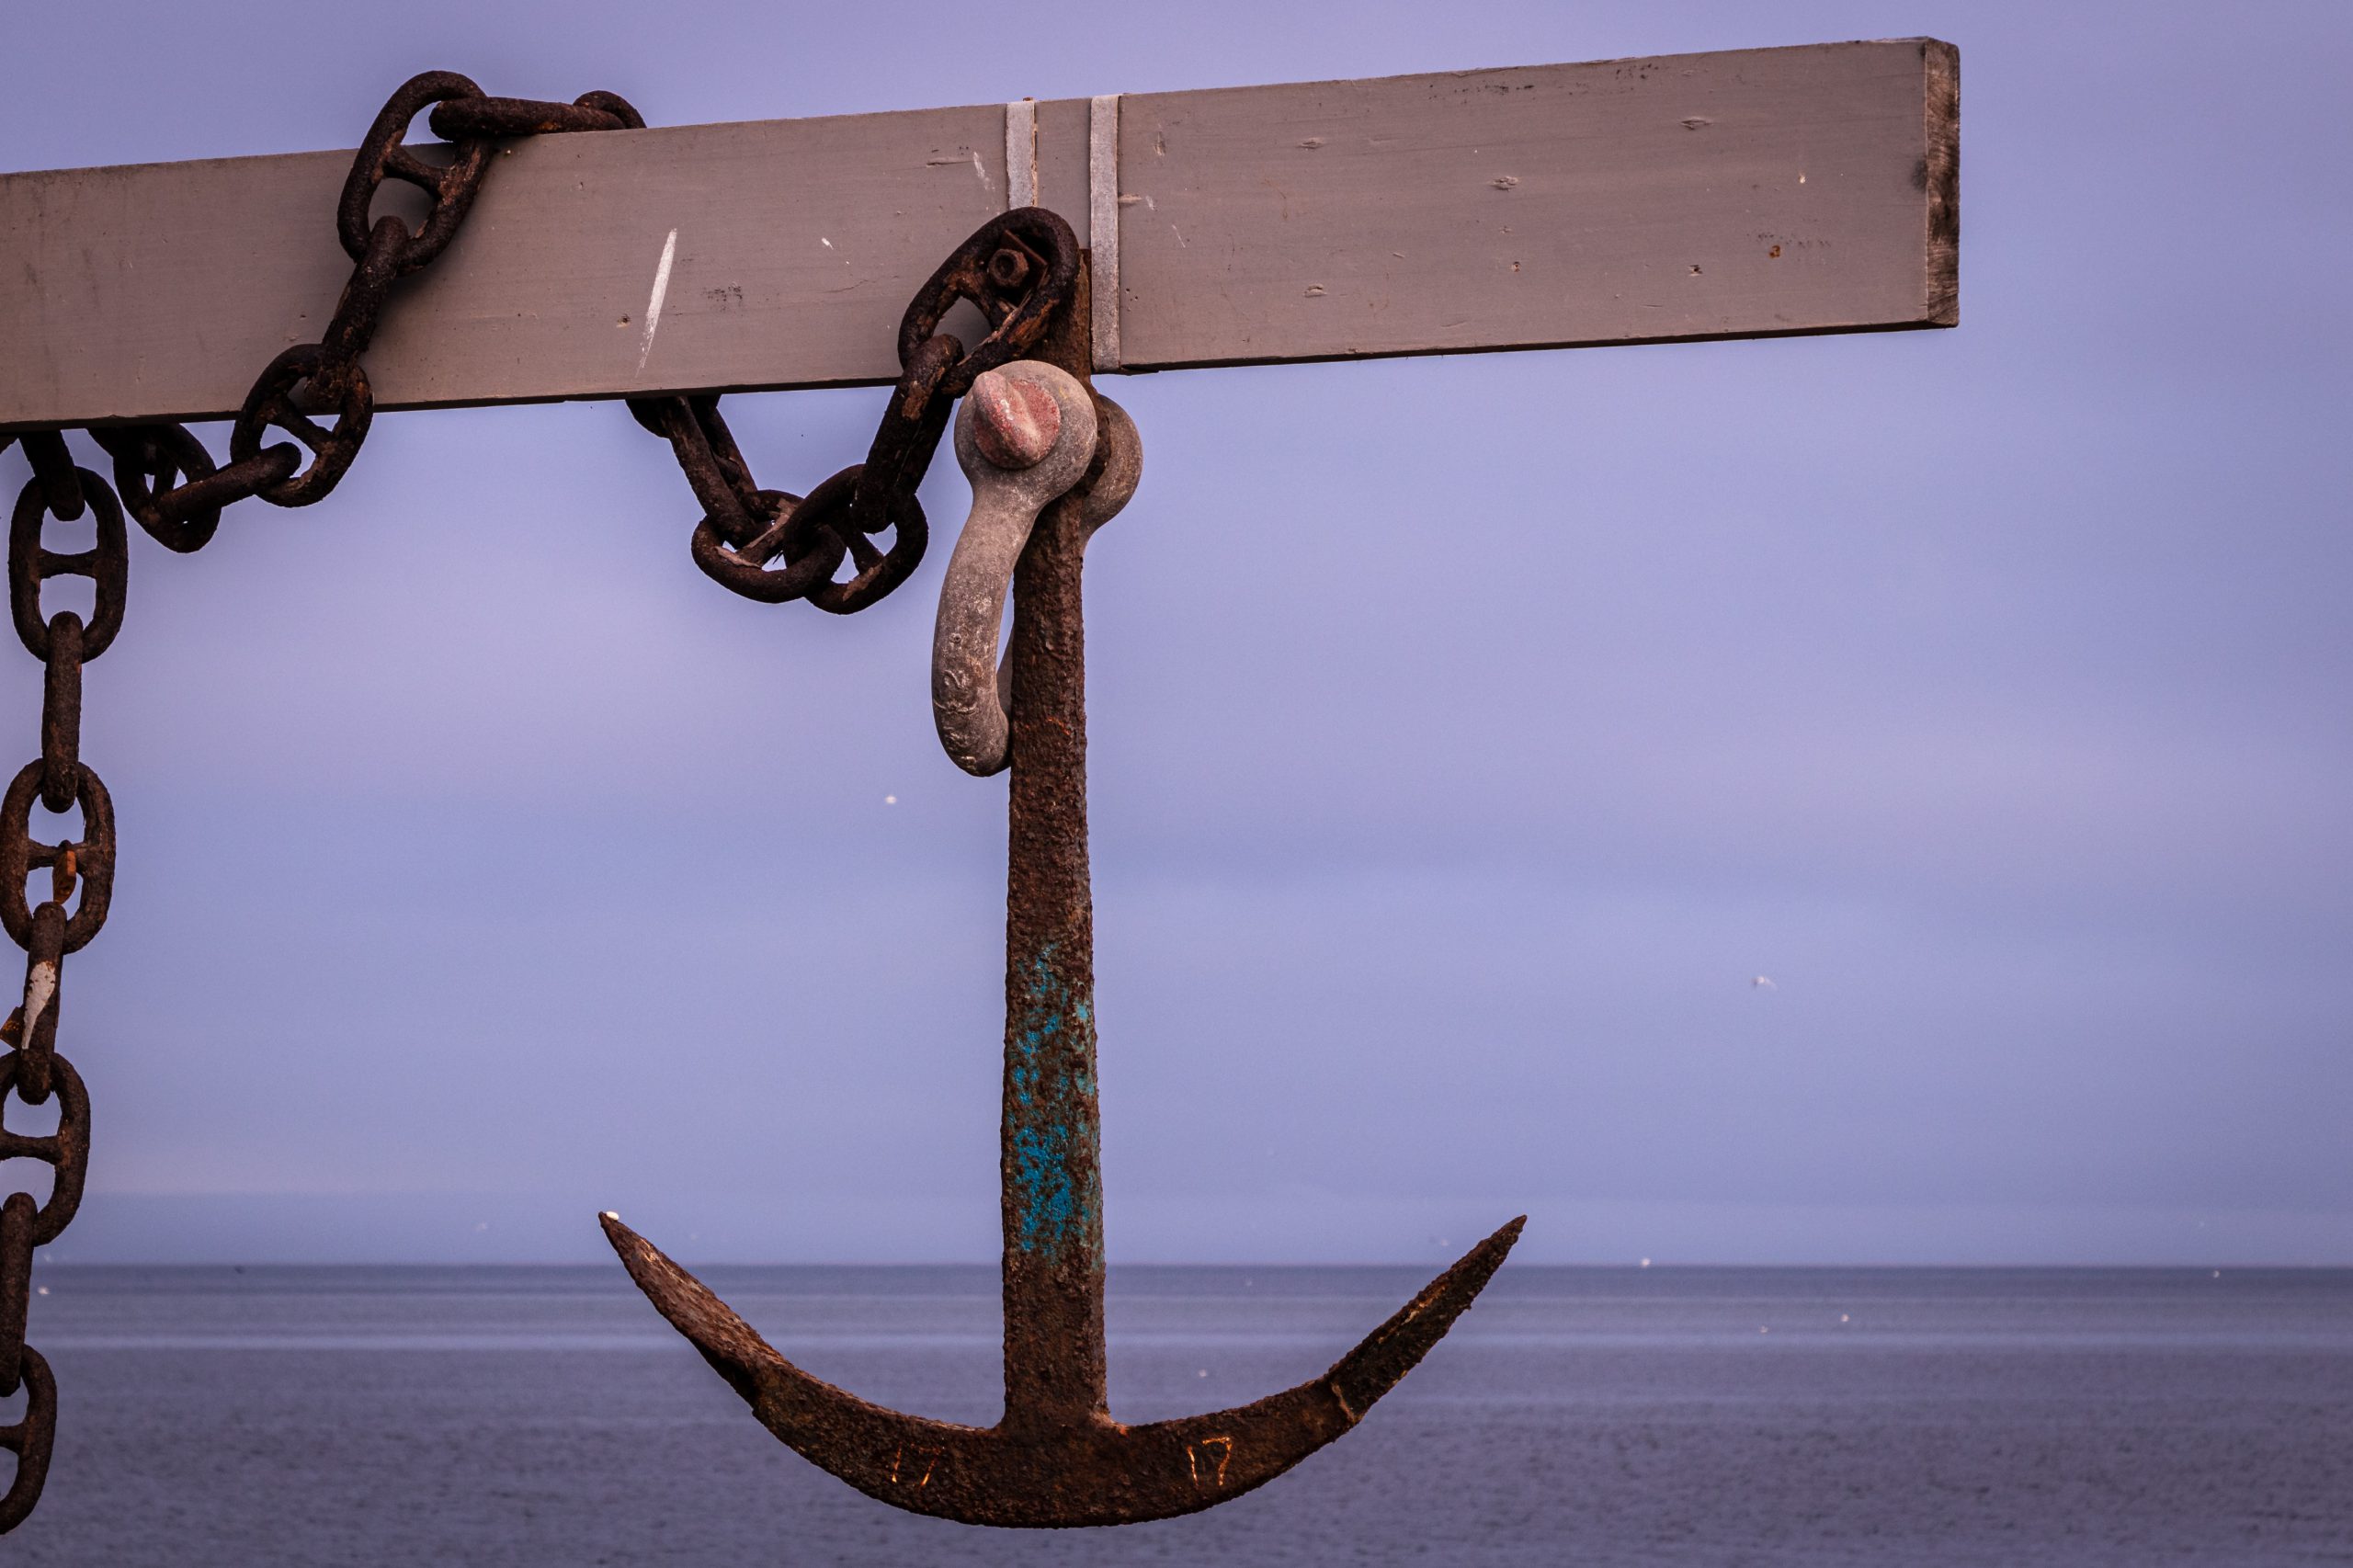 The Four Mistakes we make in our thinking - the anchor effect